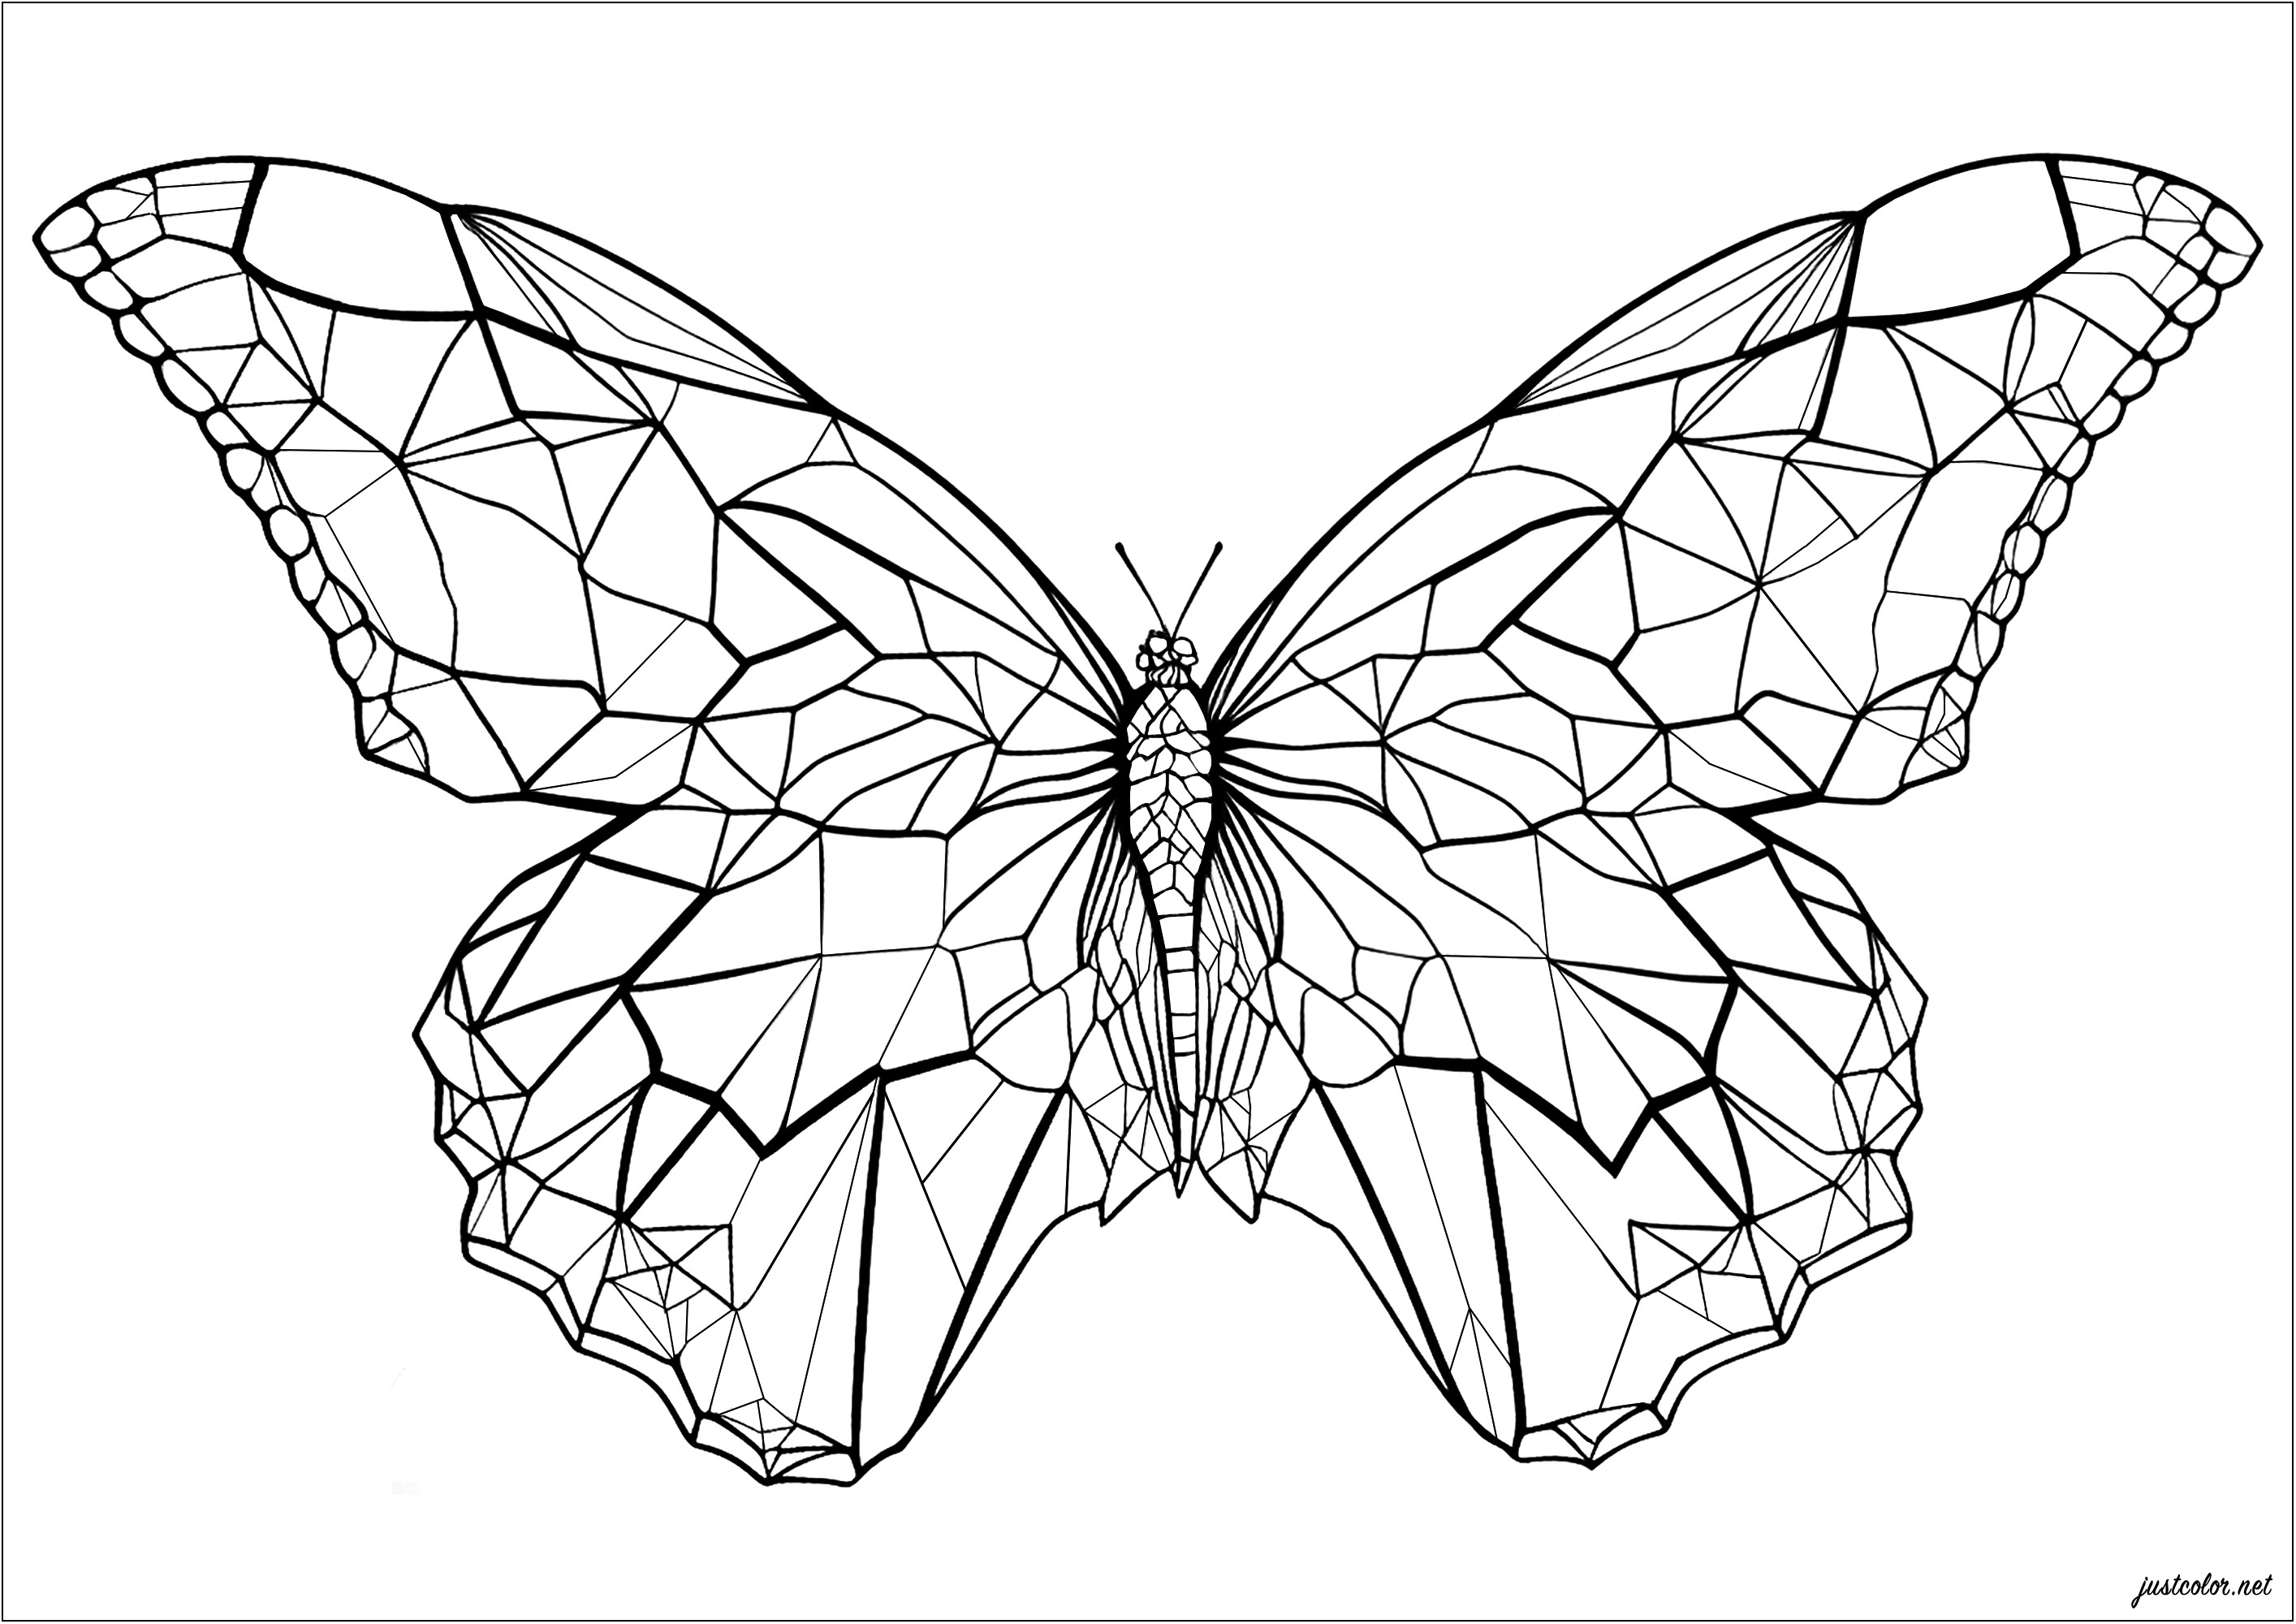 A butterfly with angular and geometrical wings. Color each geometric shape of this beautiful butterfly's wings! Gradients of colors, colors of the rainbow ... Symmetry or not ... it's up to you to choose your style, the possibilities are endless and the result is sure to be beautiful.